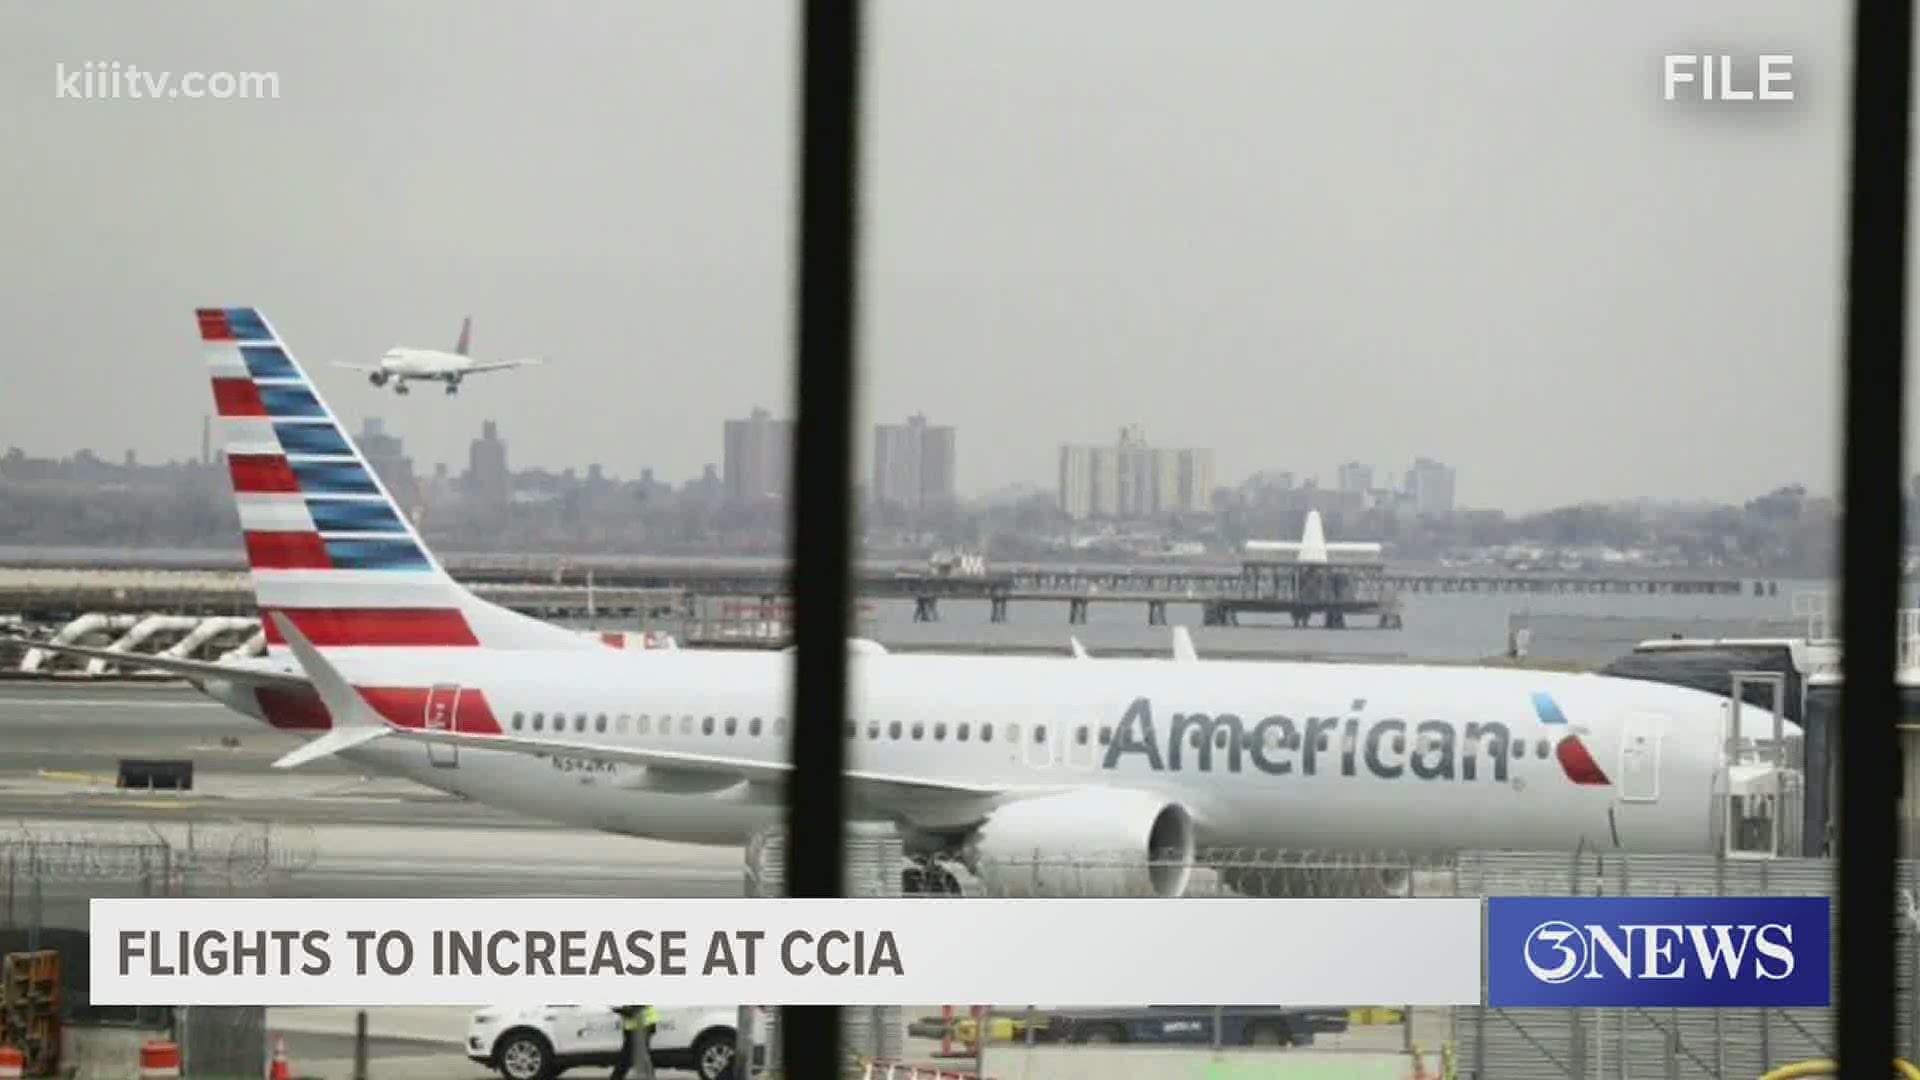 Starting next week, American Airlines will go from two flights a day to as many as six.